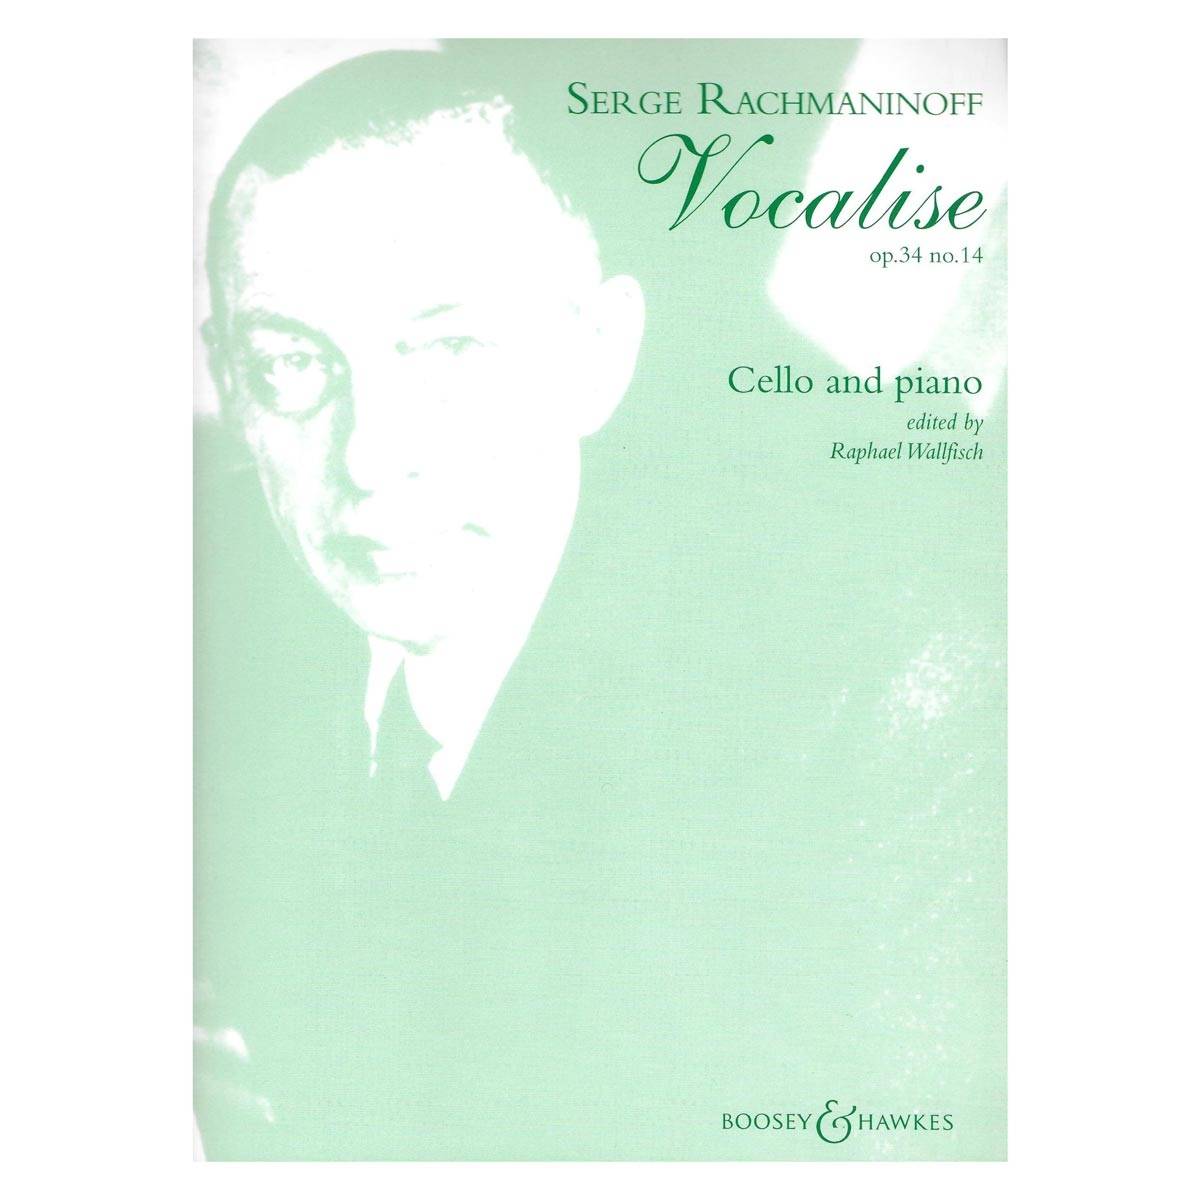 Rachmaninoff - Vocalise Op. 34 No. 14 for Cello and Piano